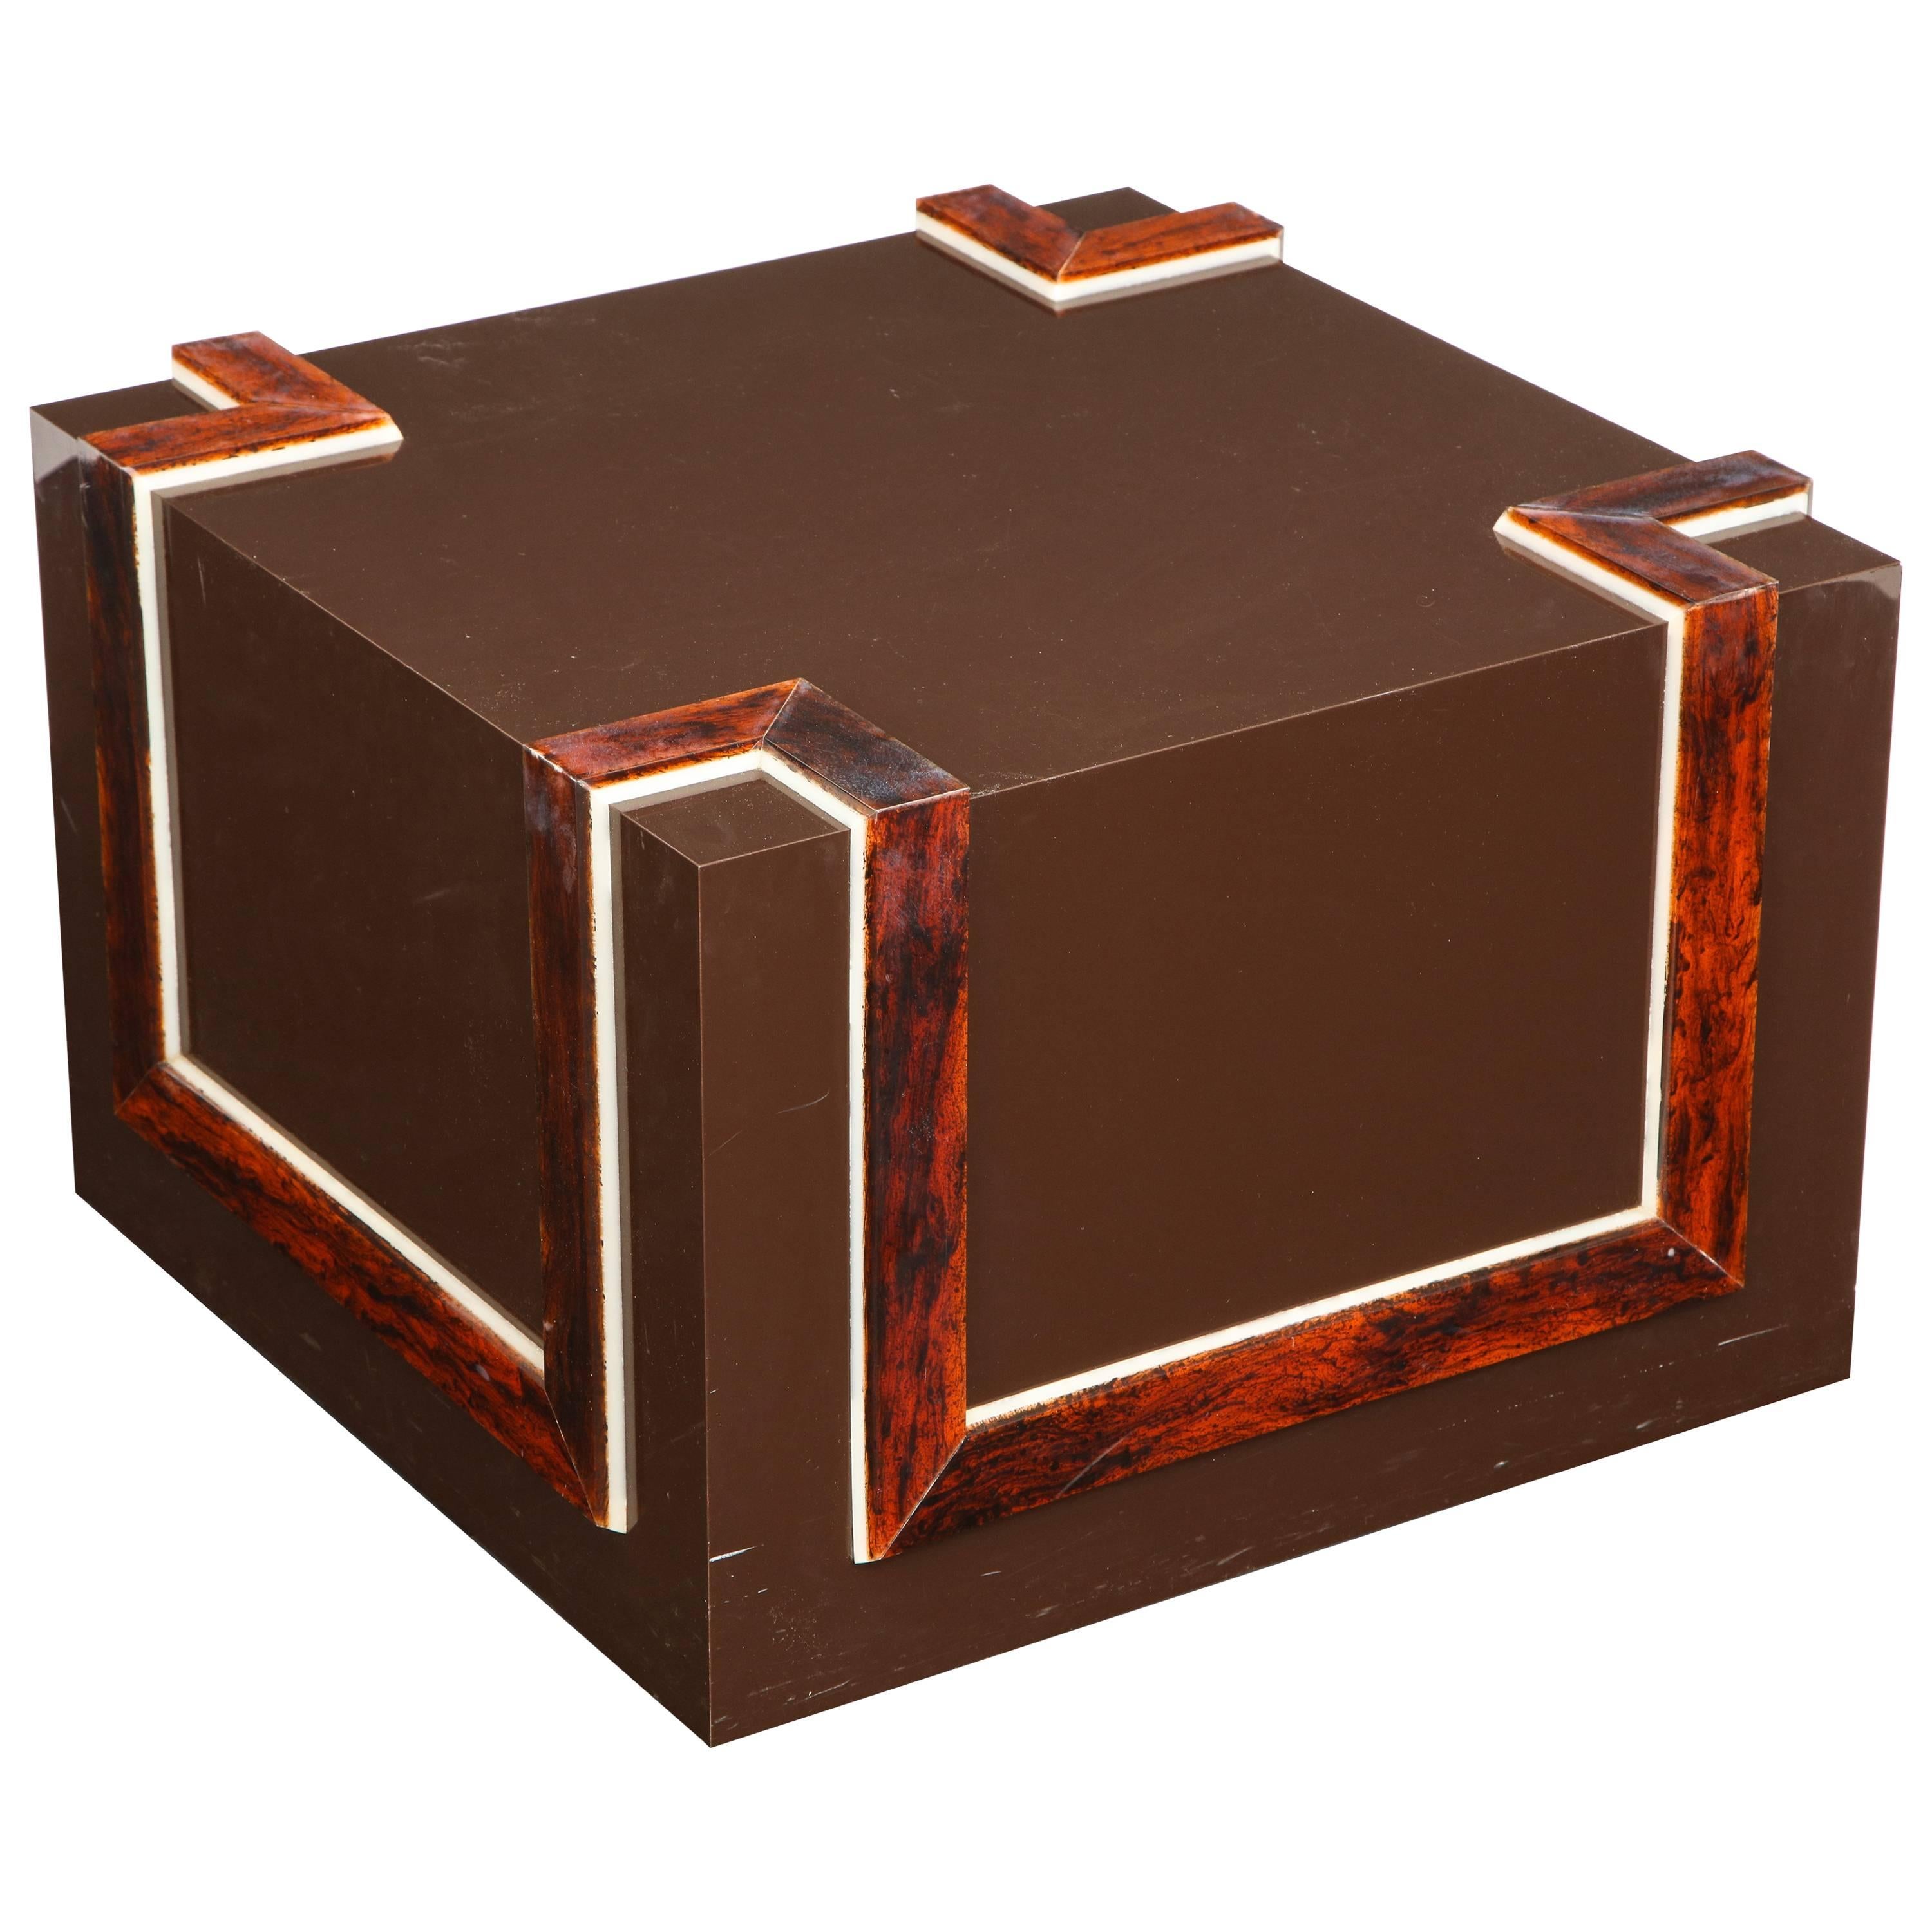 Modernist Cube Form Cocktail Table with Faux Tortoiseshell Decoration